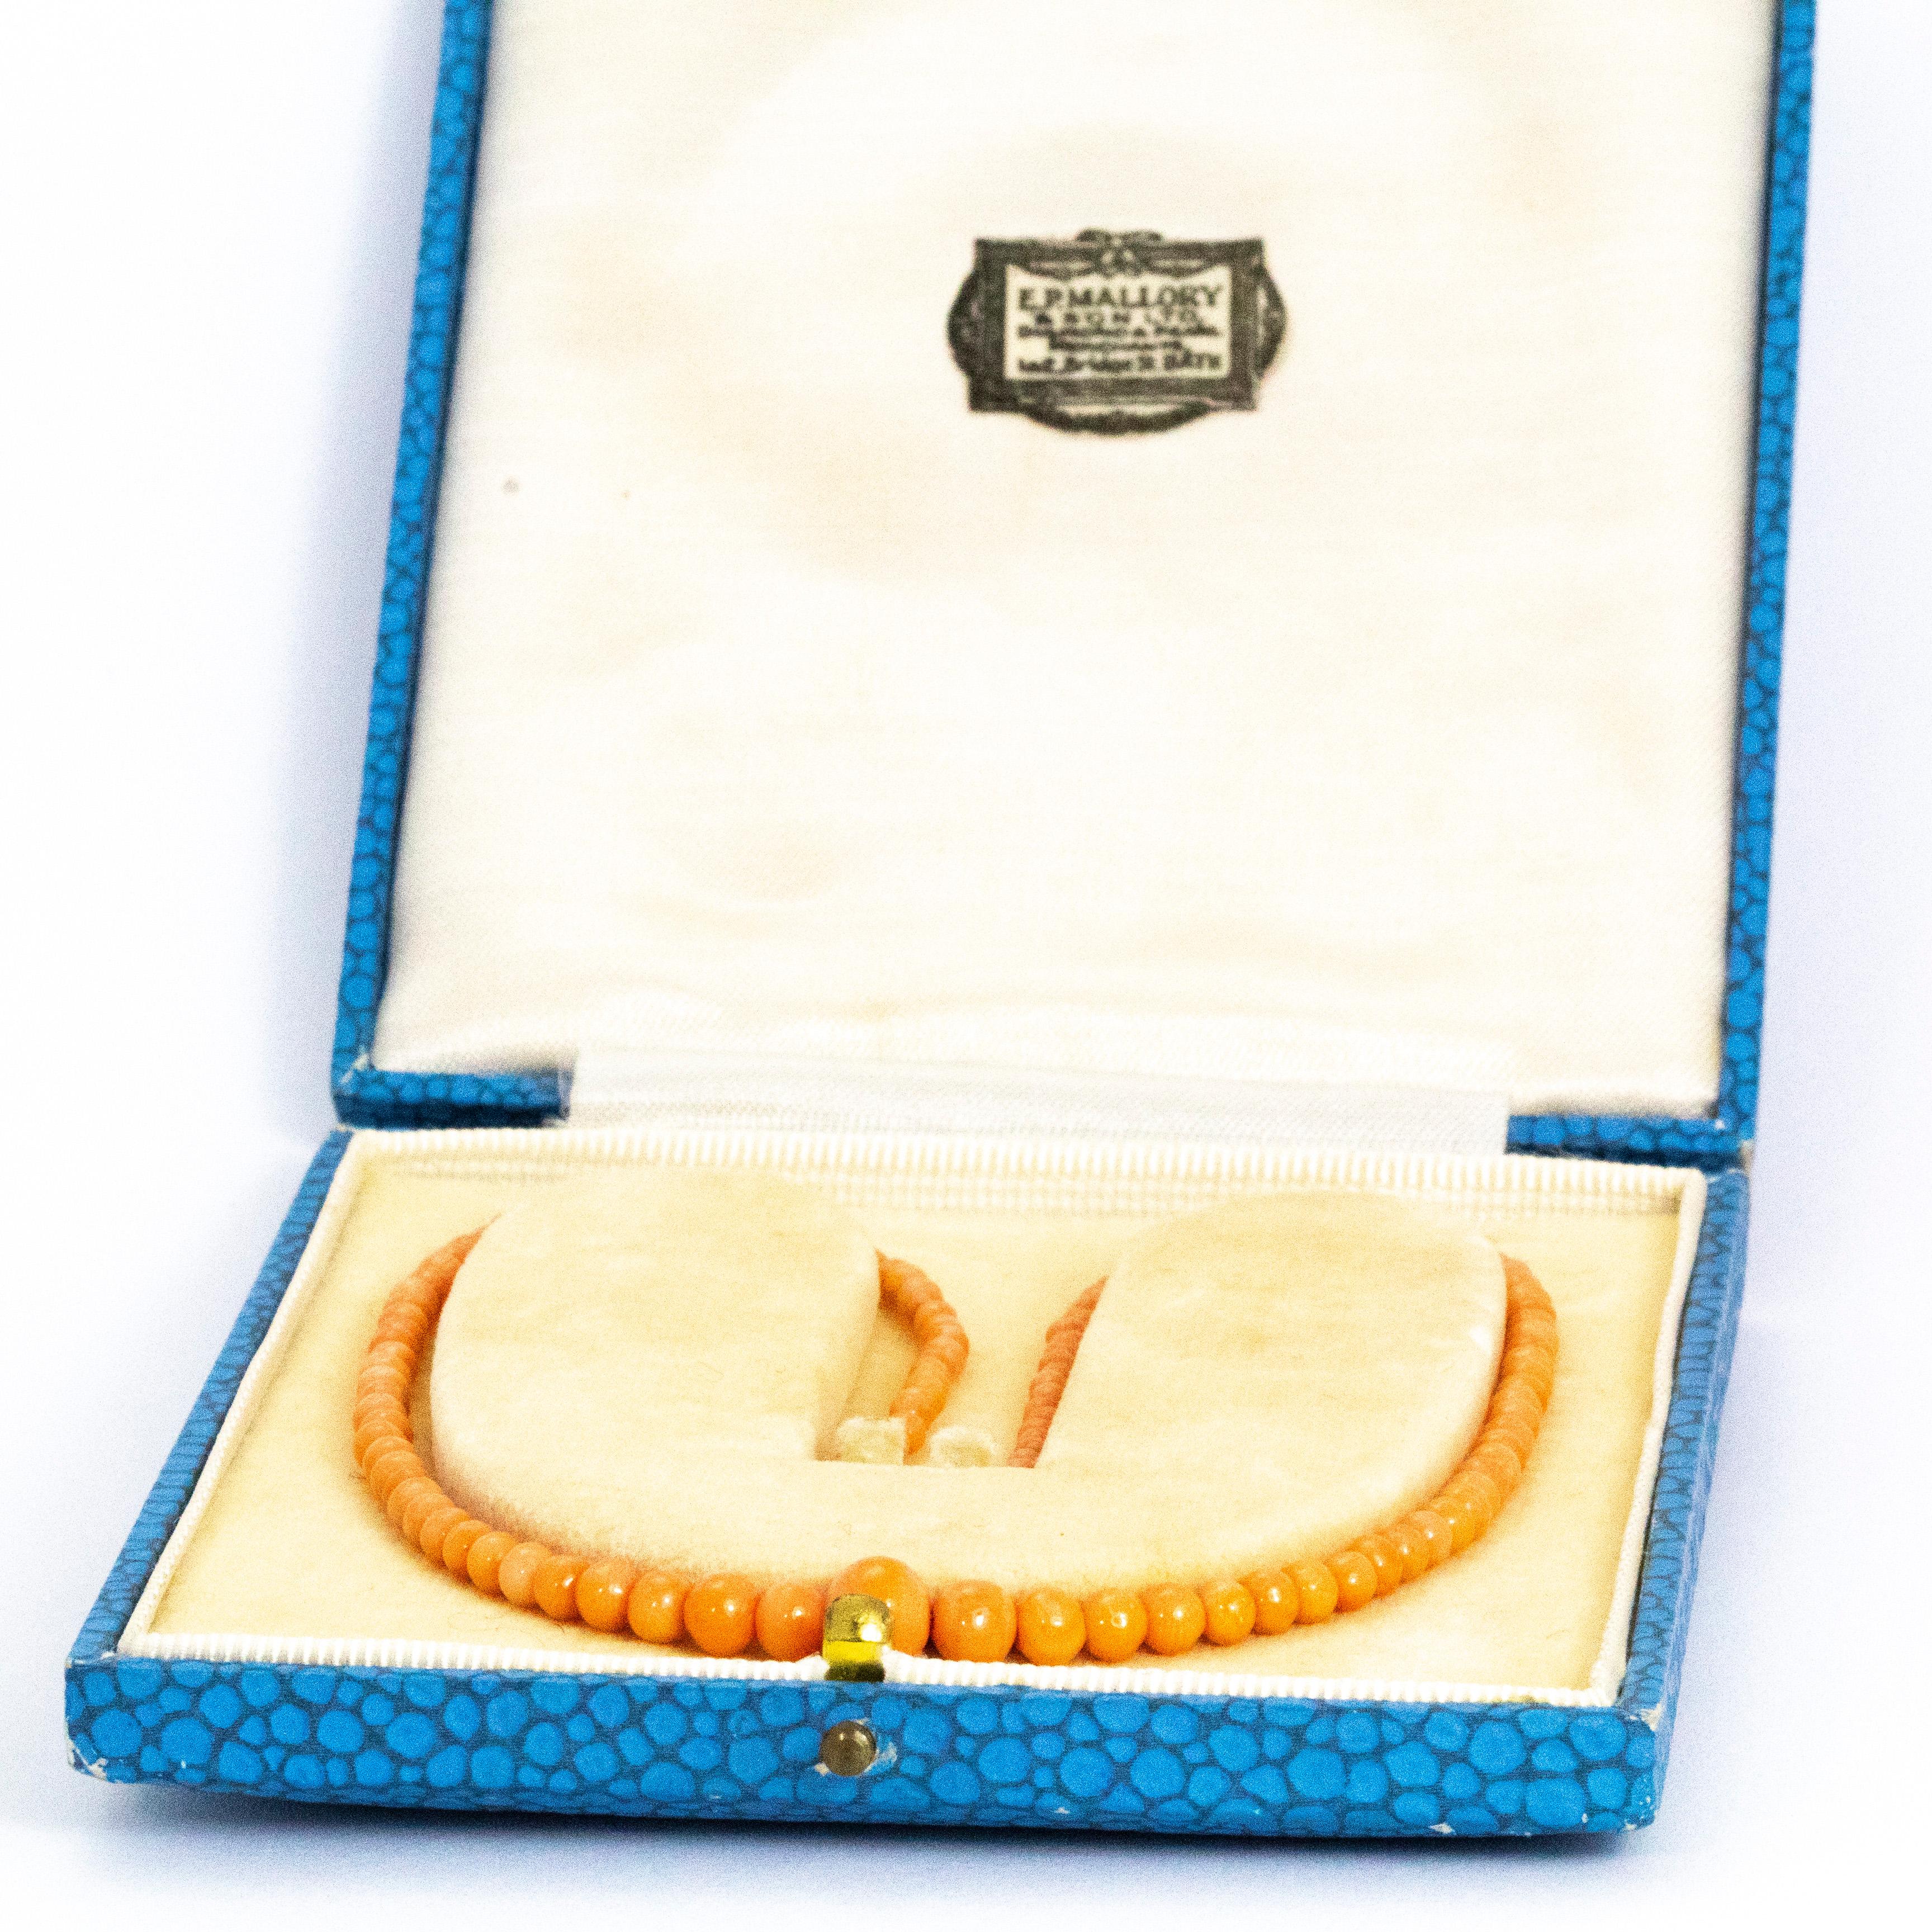 This gorgeous coral beaded necklace is graduated in size as you get to the centre of the length. Made by E.P Mallory of Bath, this necklace comes in its original box and is in wonderful condition. The necklace is fastened by using a barrel